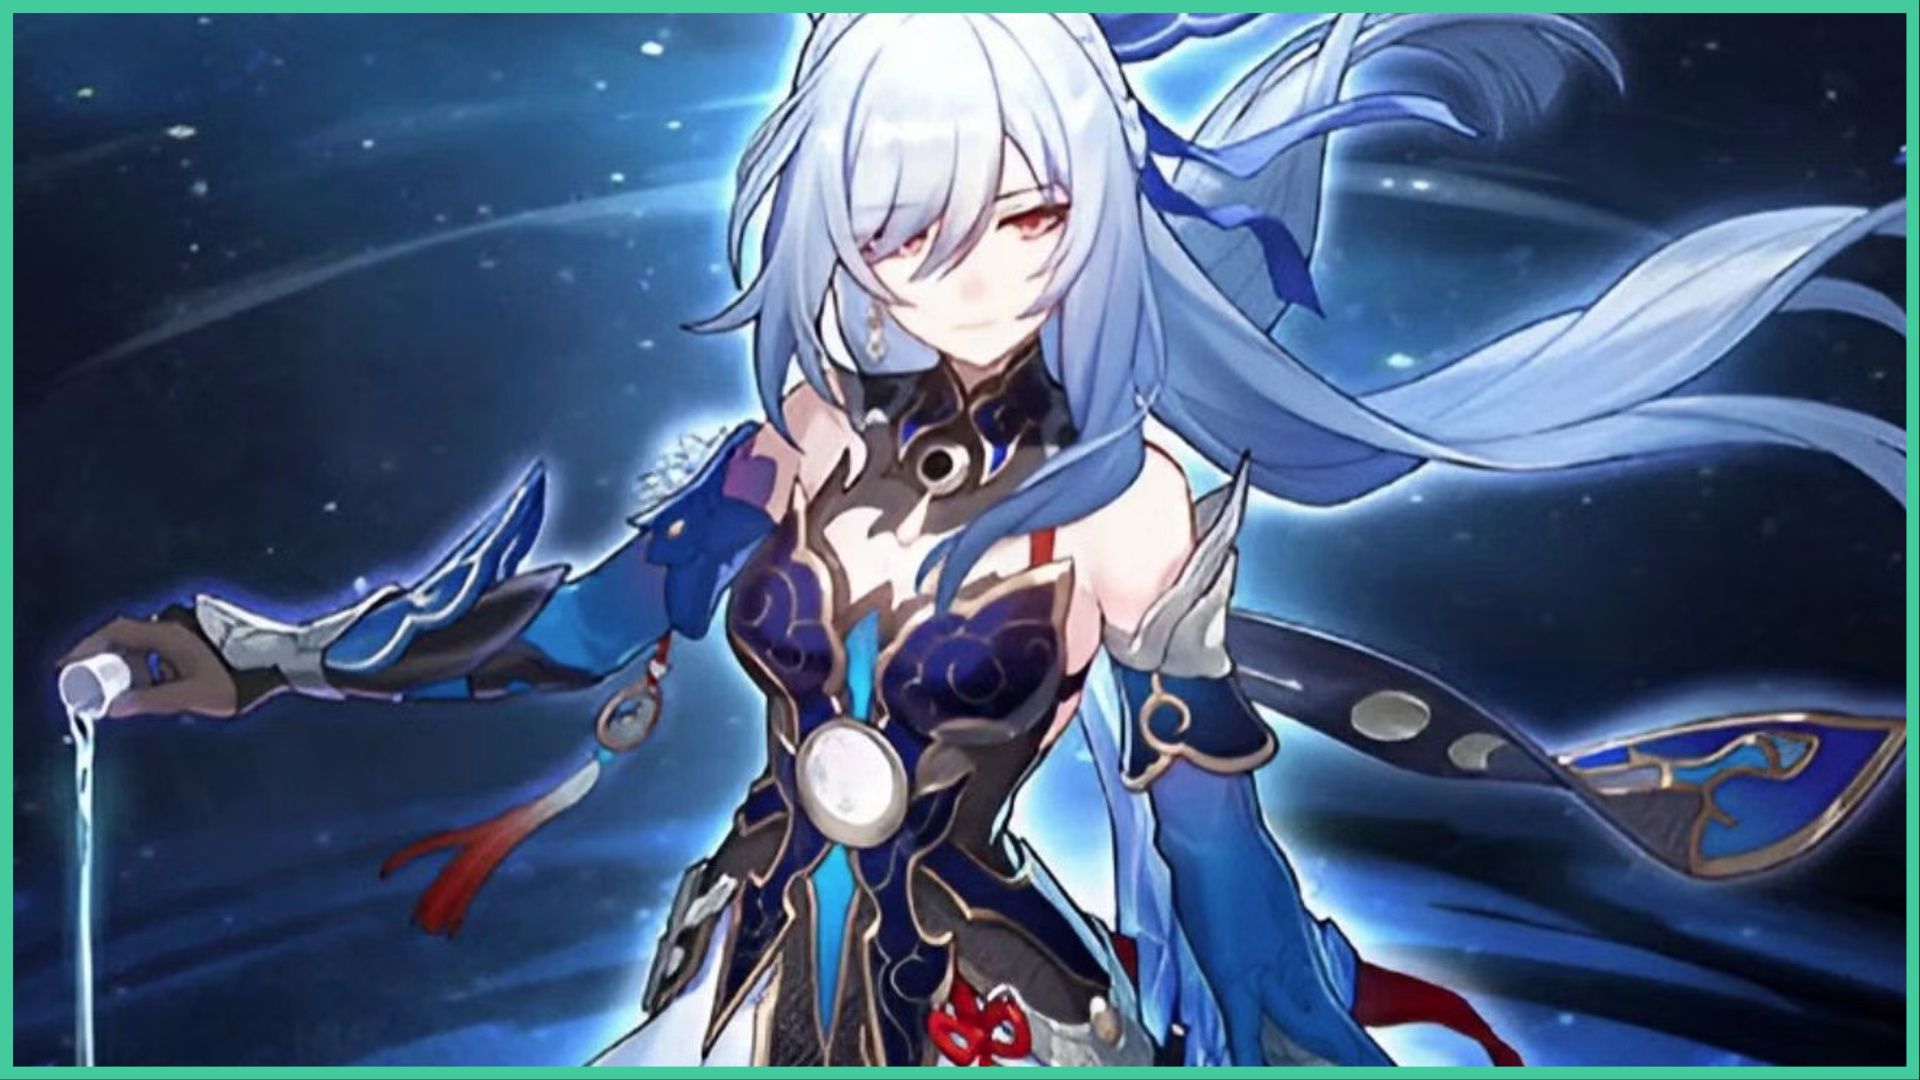 feature image for our honkai star rail jingliu tier list, the image features promo art for jingliu as she pours liquid out of a small cup as the wind blows her hair as she stands with a serious expression on her face